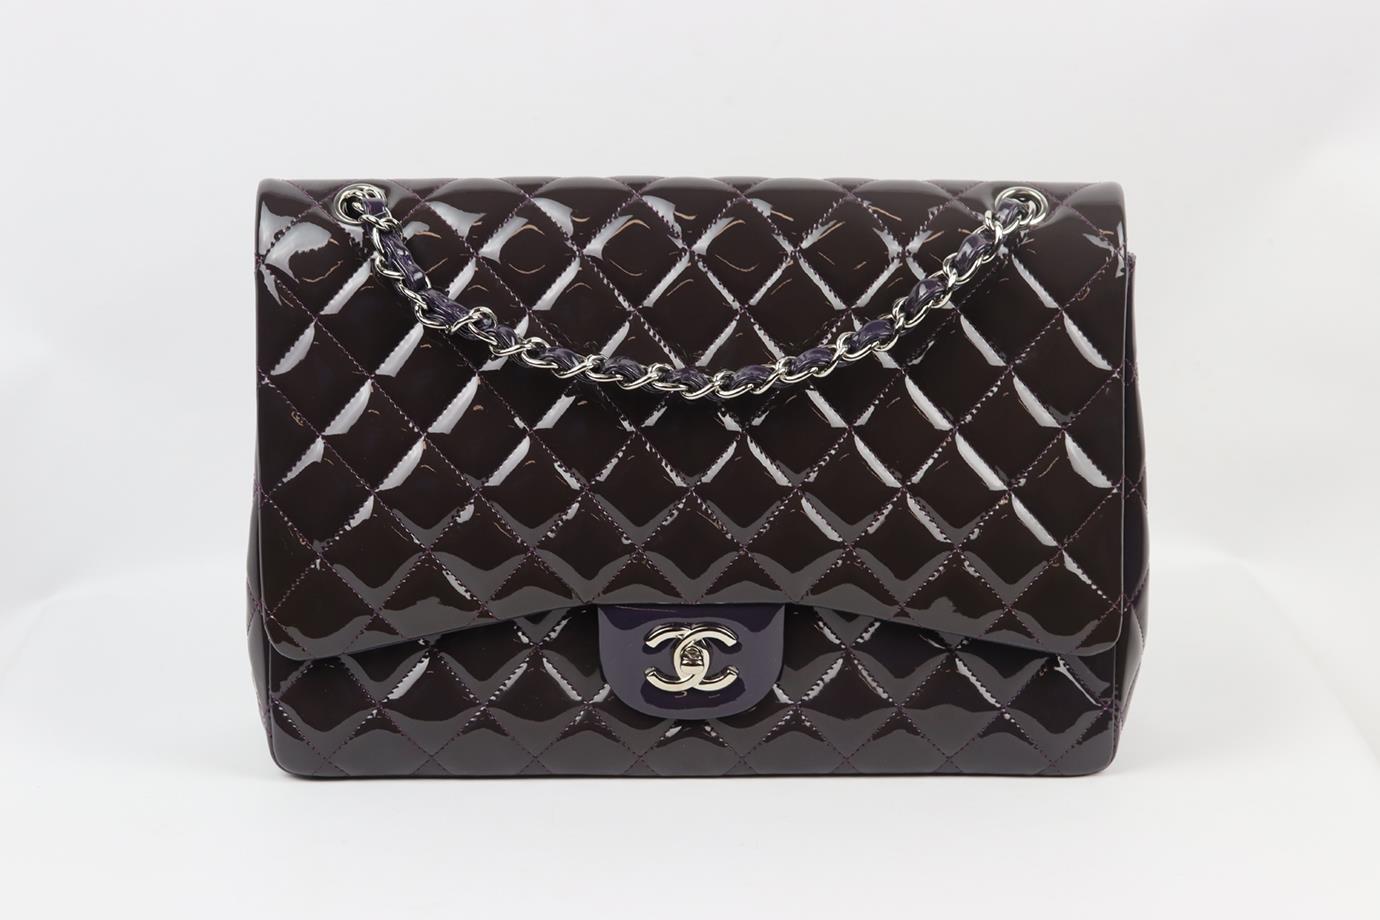 <ul>
<li>Chanel 2010 Maxi Classic quilted patent leather single flap shoulder bag.</li>
<li>Made from dark-purple quilted patent-leather with matching purple leather interior and silver-tone hardware and chain shoulder straps.</li>
<li>Dark